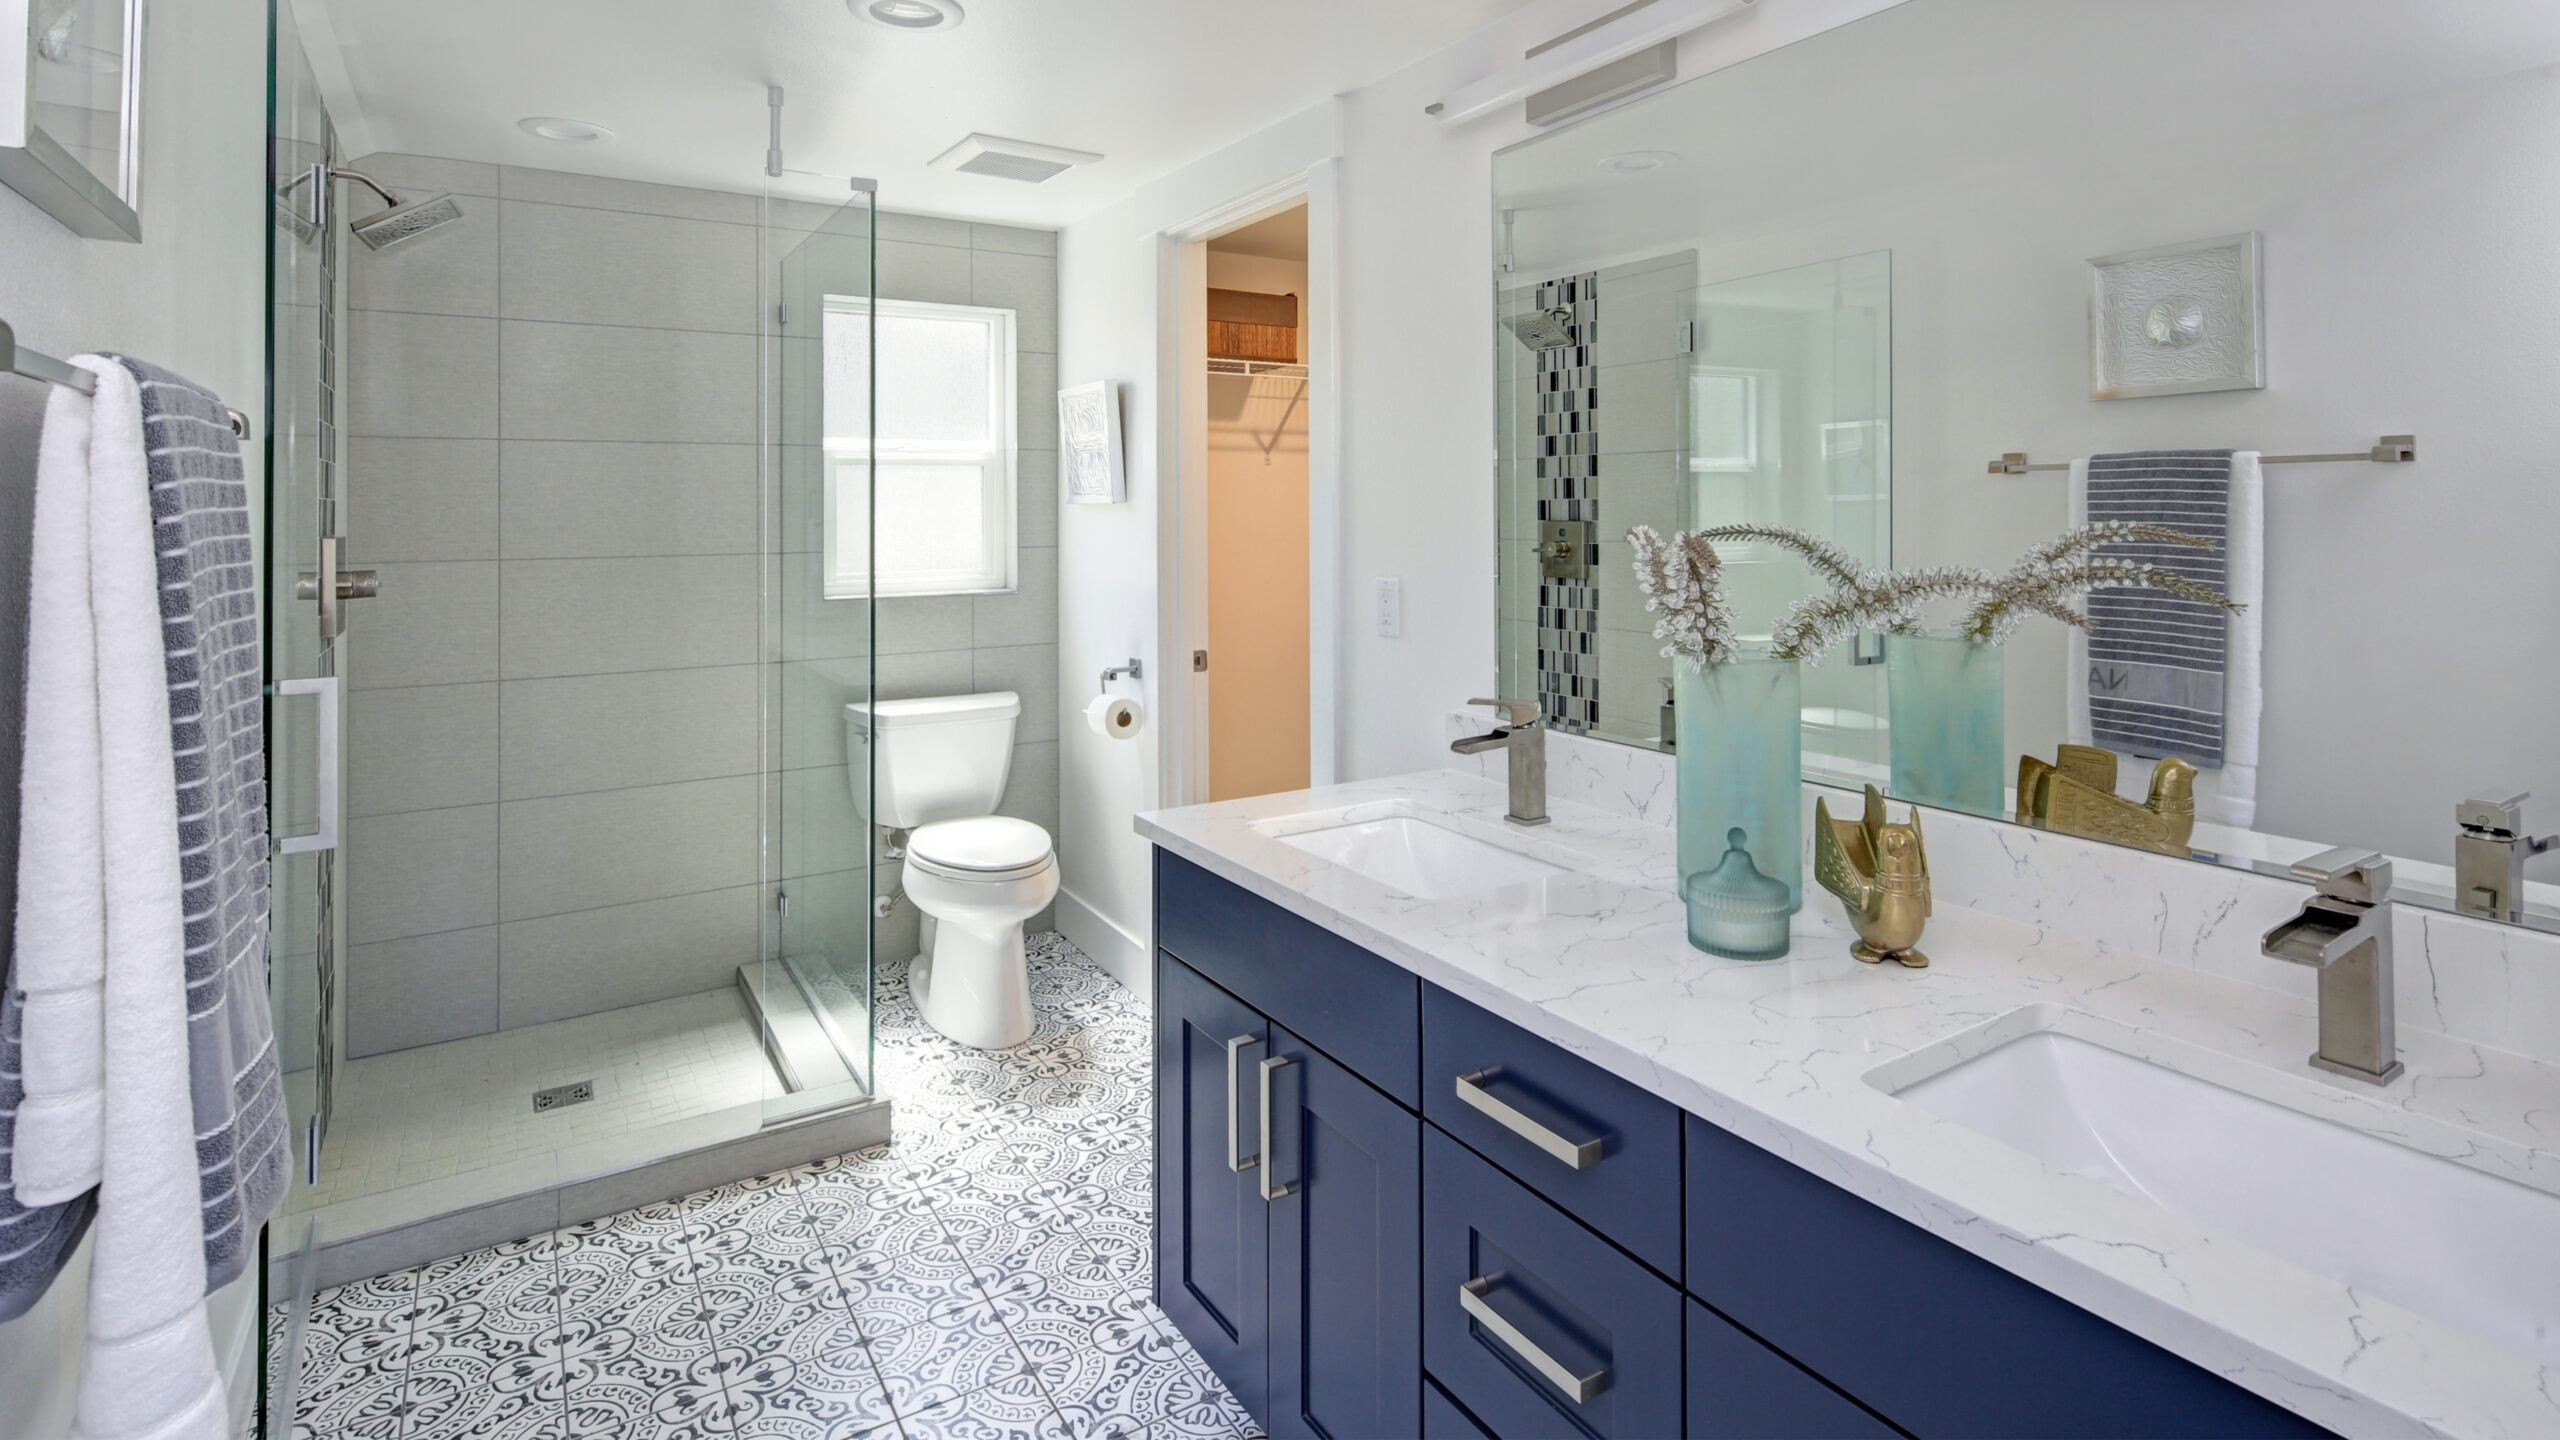 A bathroom with tile floors, a blue vanity, and walk-in shower